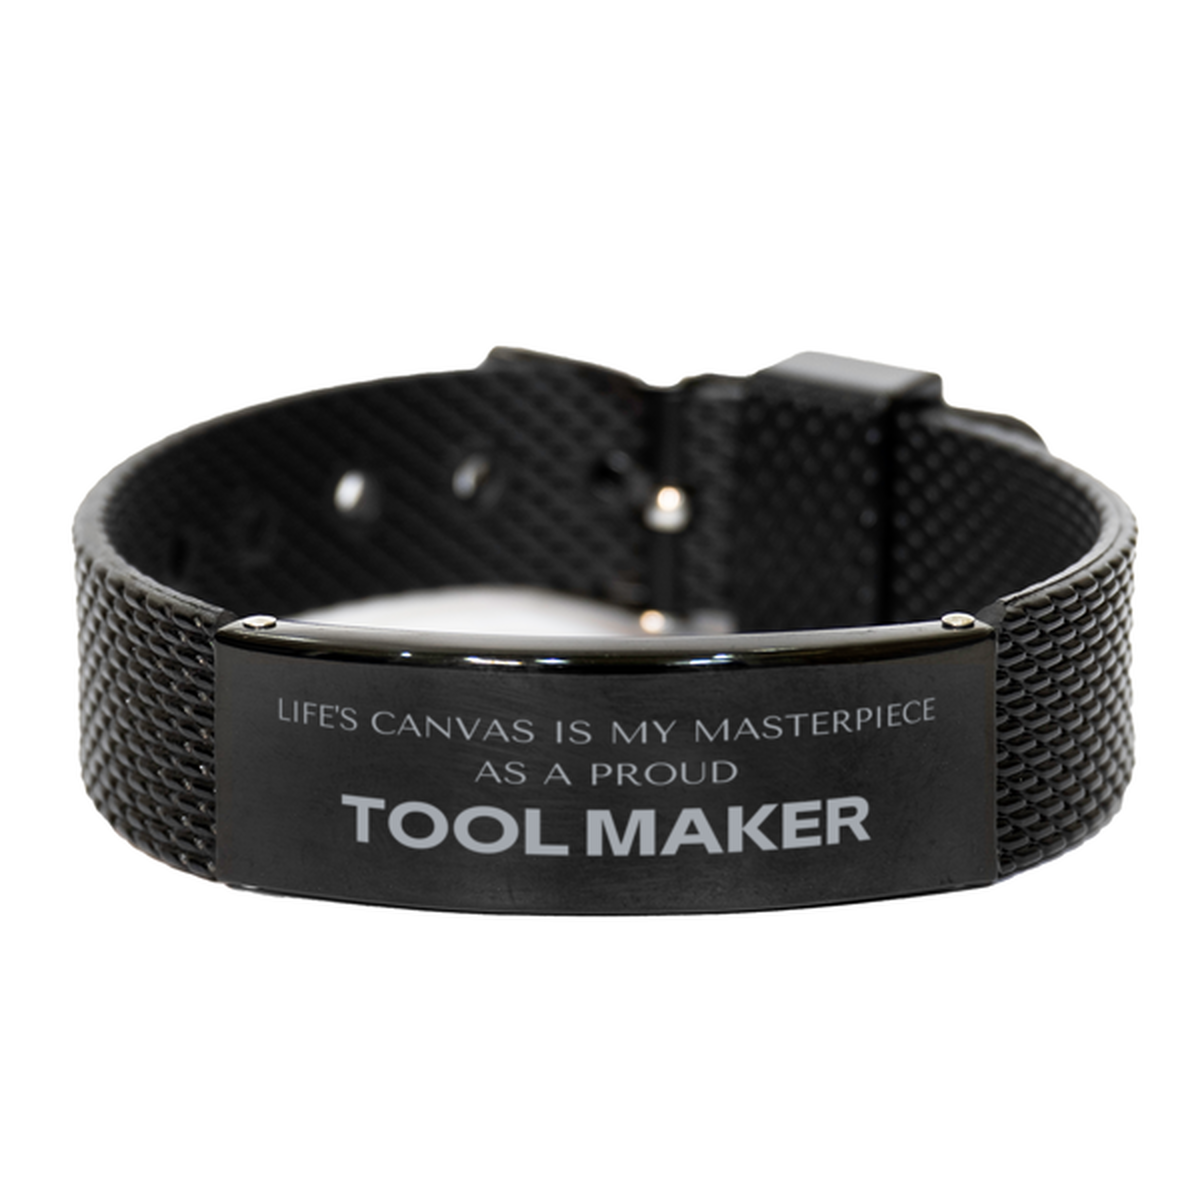 Proud Tool Maker Gifts, Life's canvas is my masterpiece, Epic Birthday Christmas Unique Black Shark Mesh Bracelet For Tool Maker, Coworkers, Men, Women, Friends